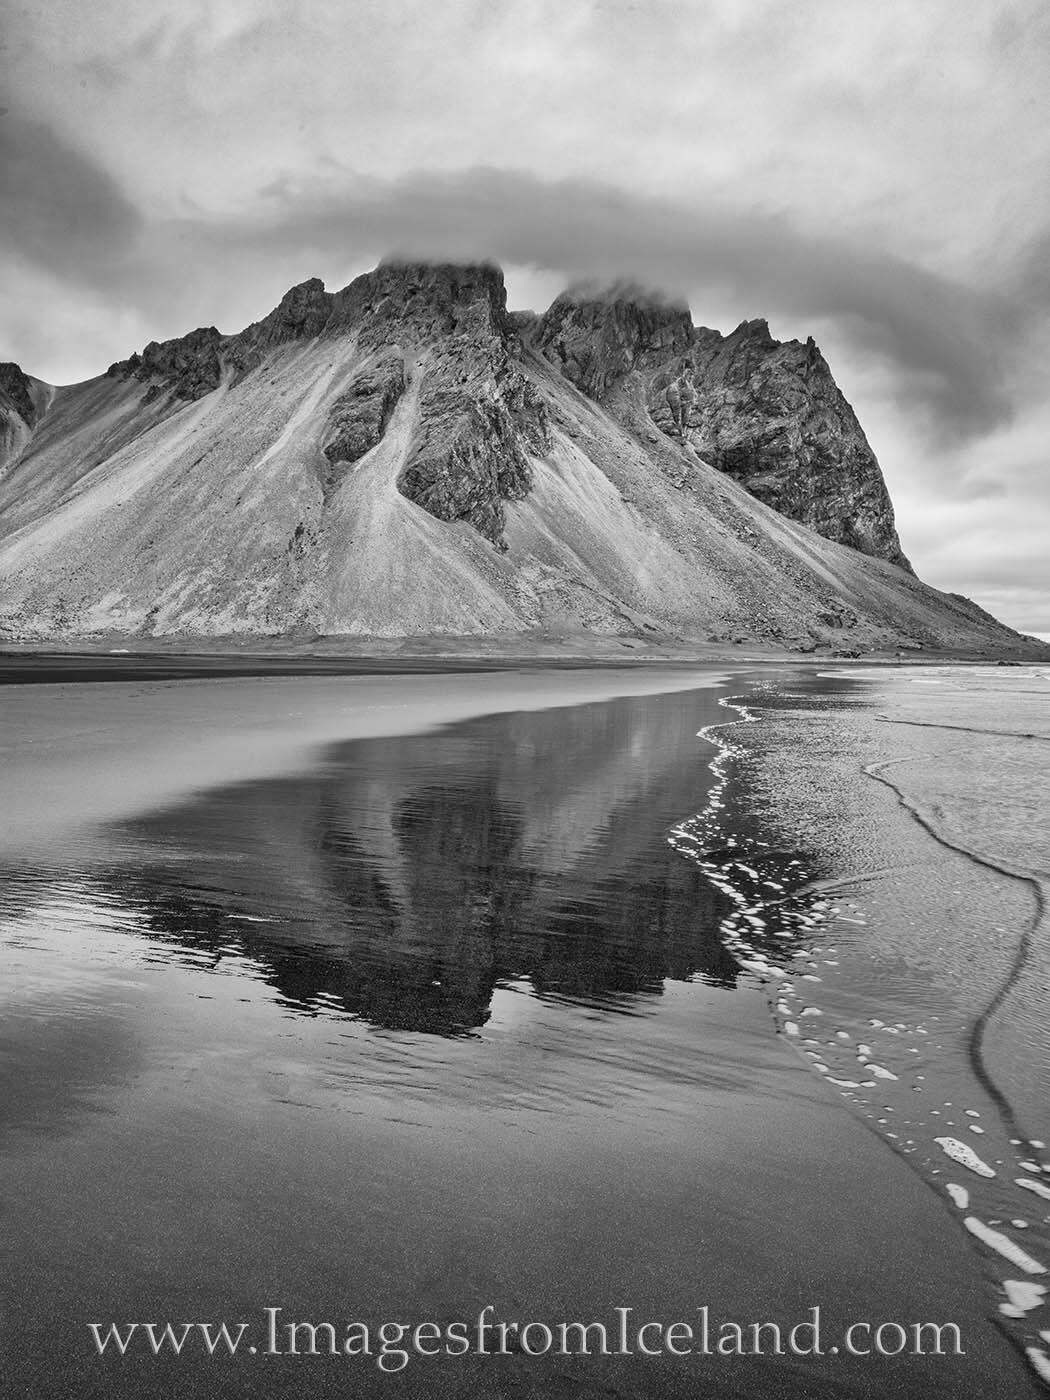 Clouds encircle the rocky heights of the iconic Vestrahorn Mountain. This black and while image shows the reflection of this...